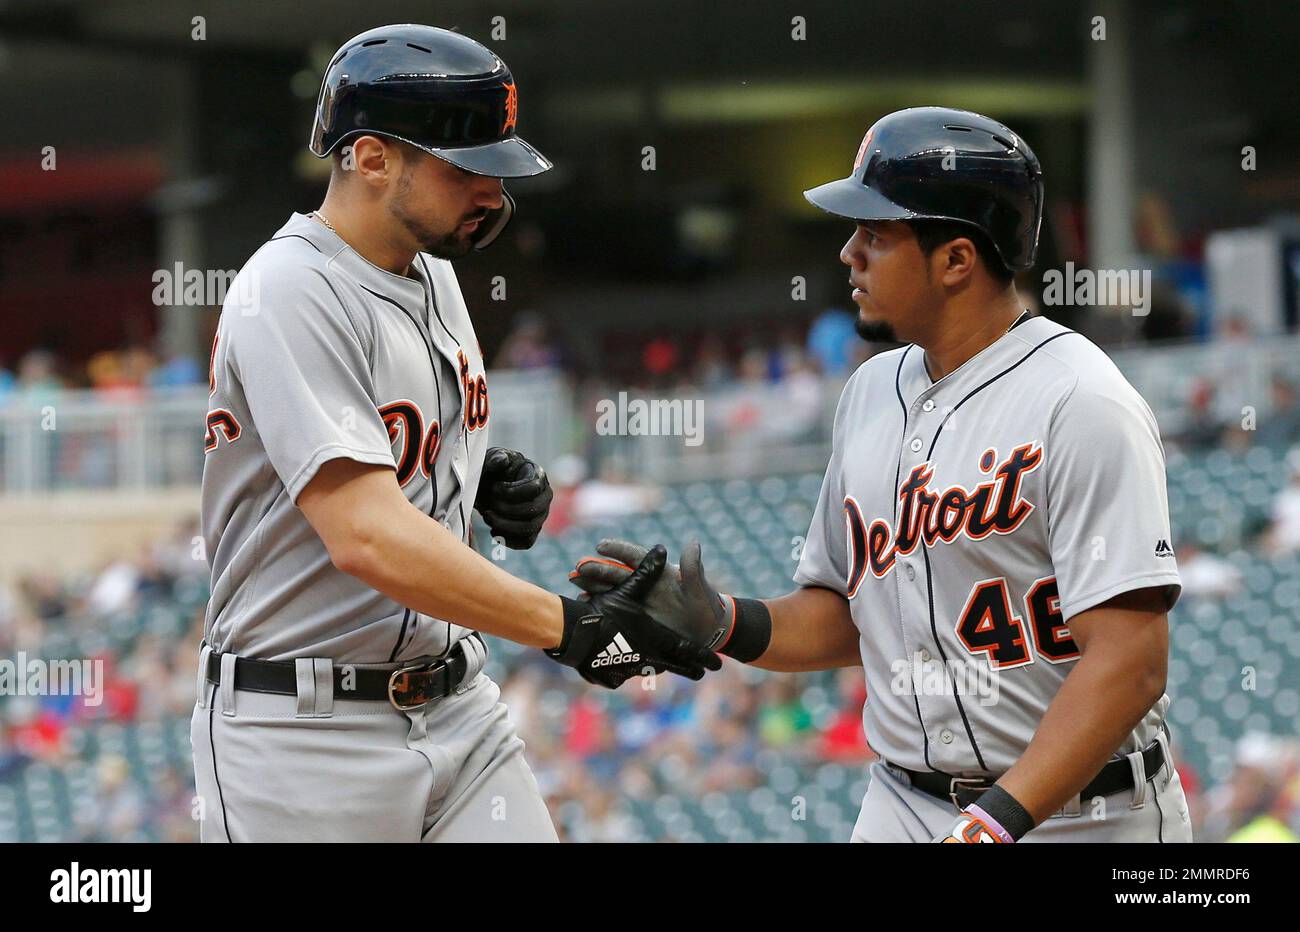 Detroit Tigers: Nicholas Castellanos not expected back at third base